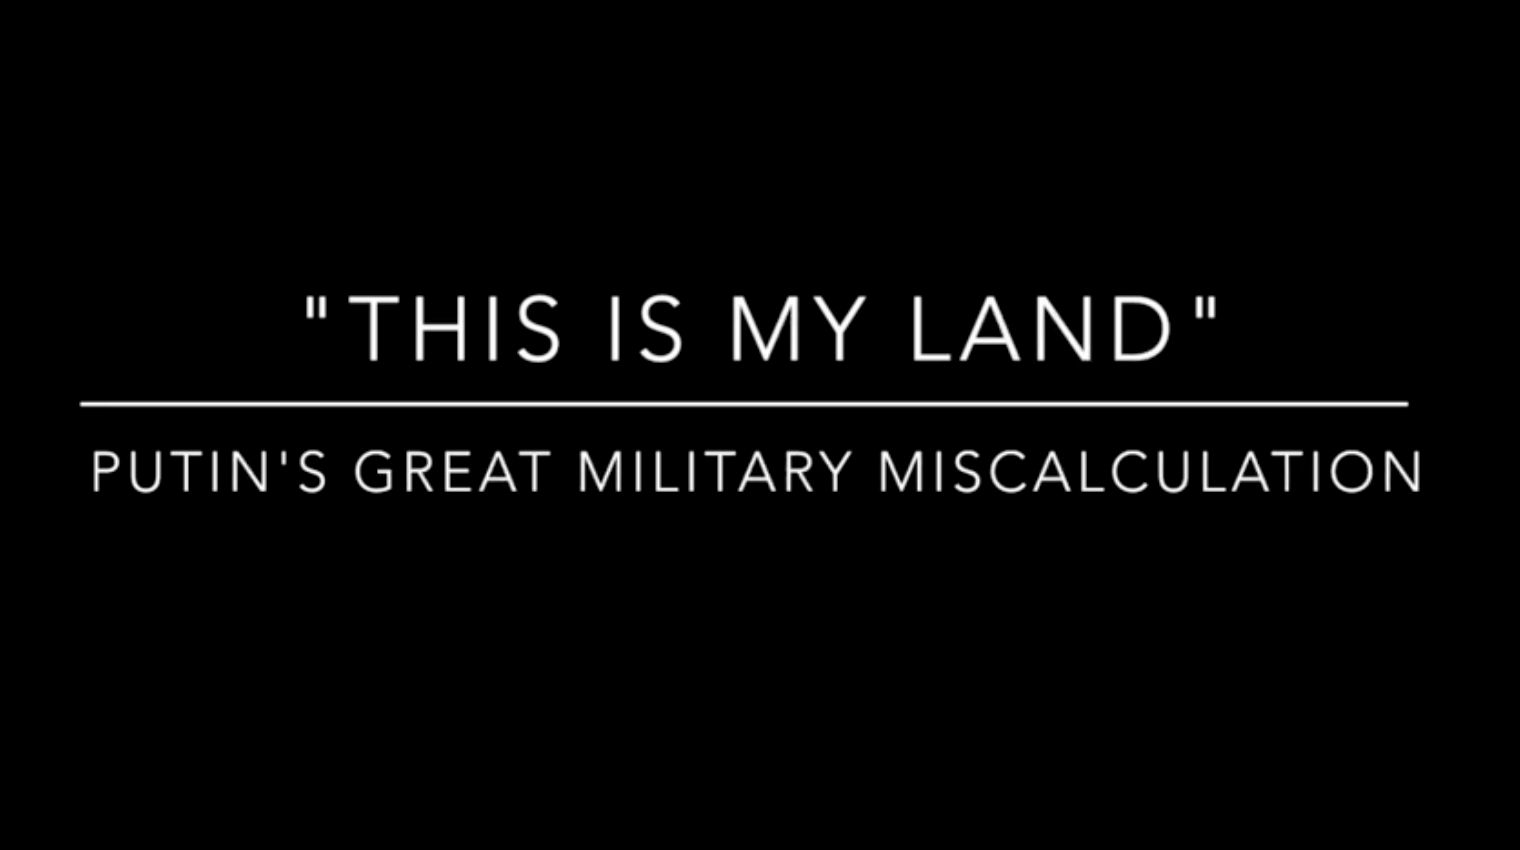 "This is my Land" - Putin's Great Military Miscalculation